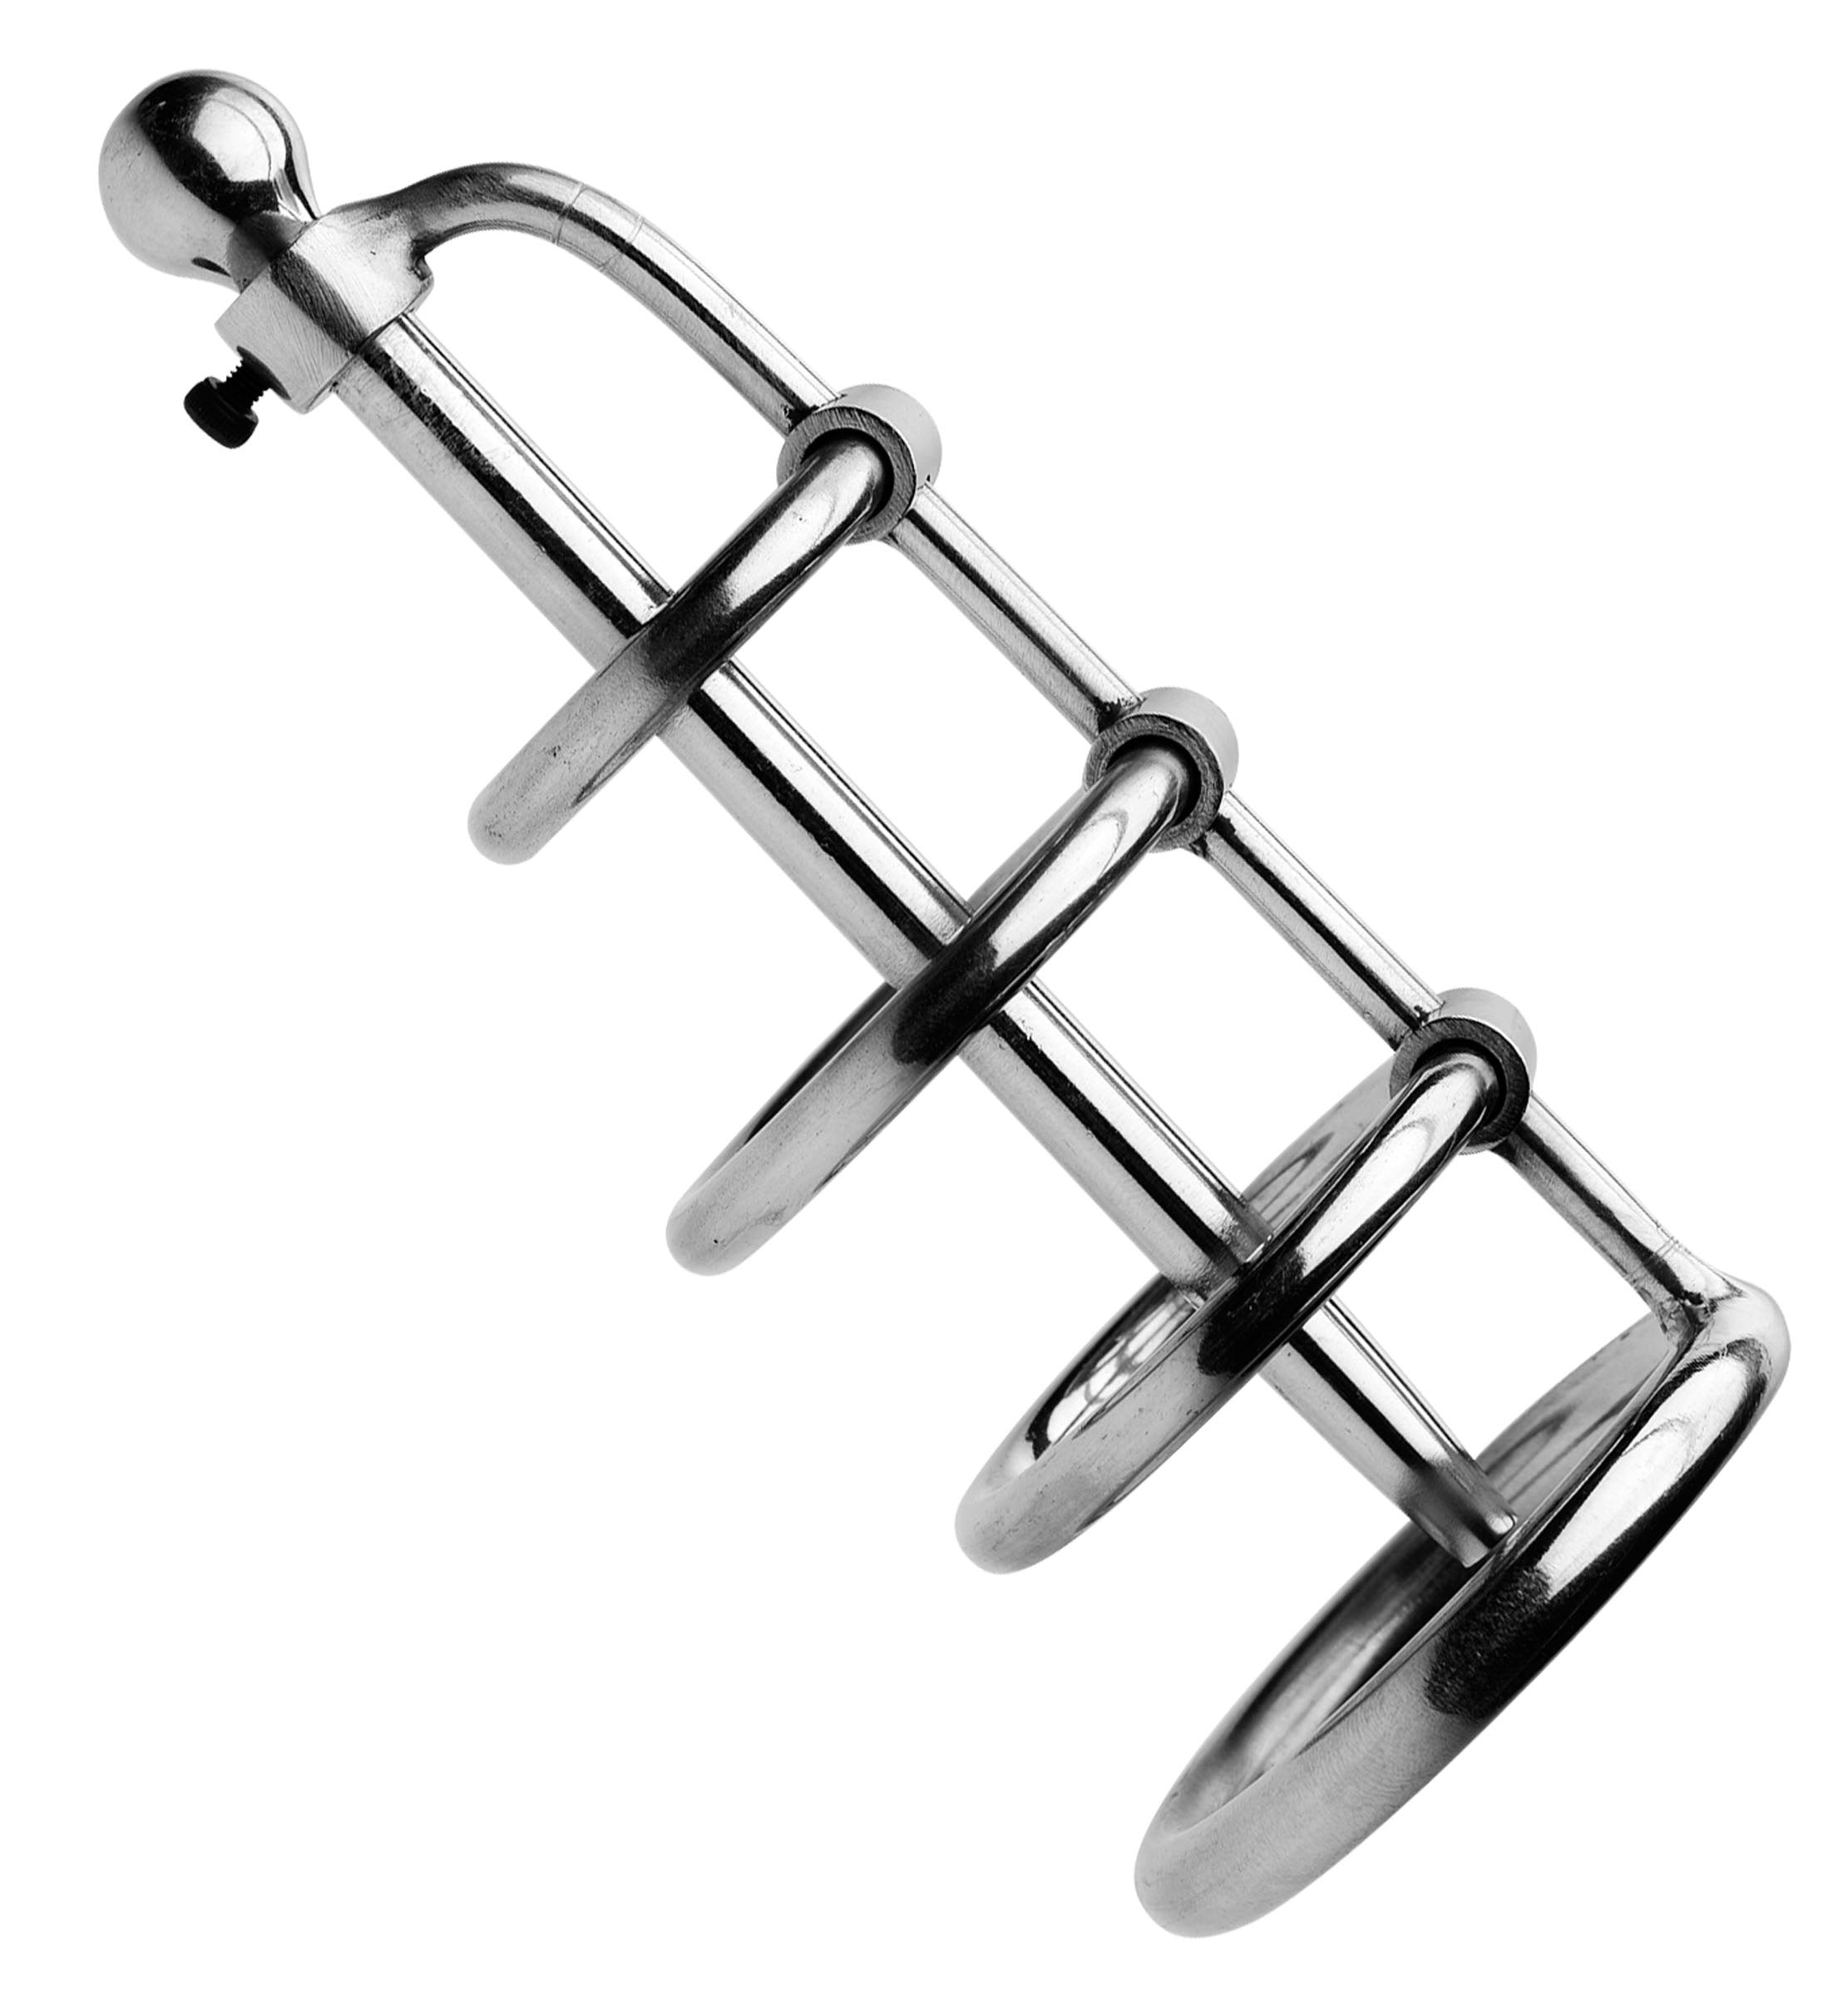 Master Series Gates of Hell With Urethral Plug-2